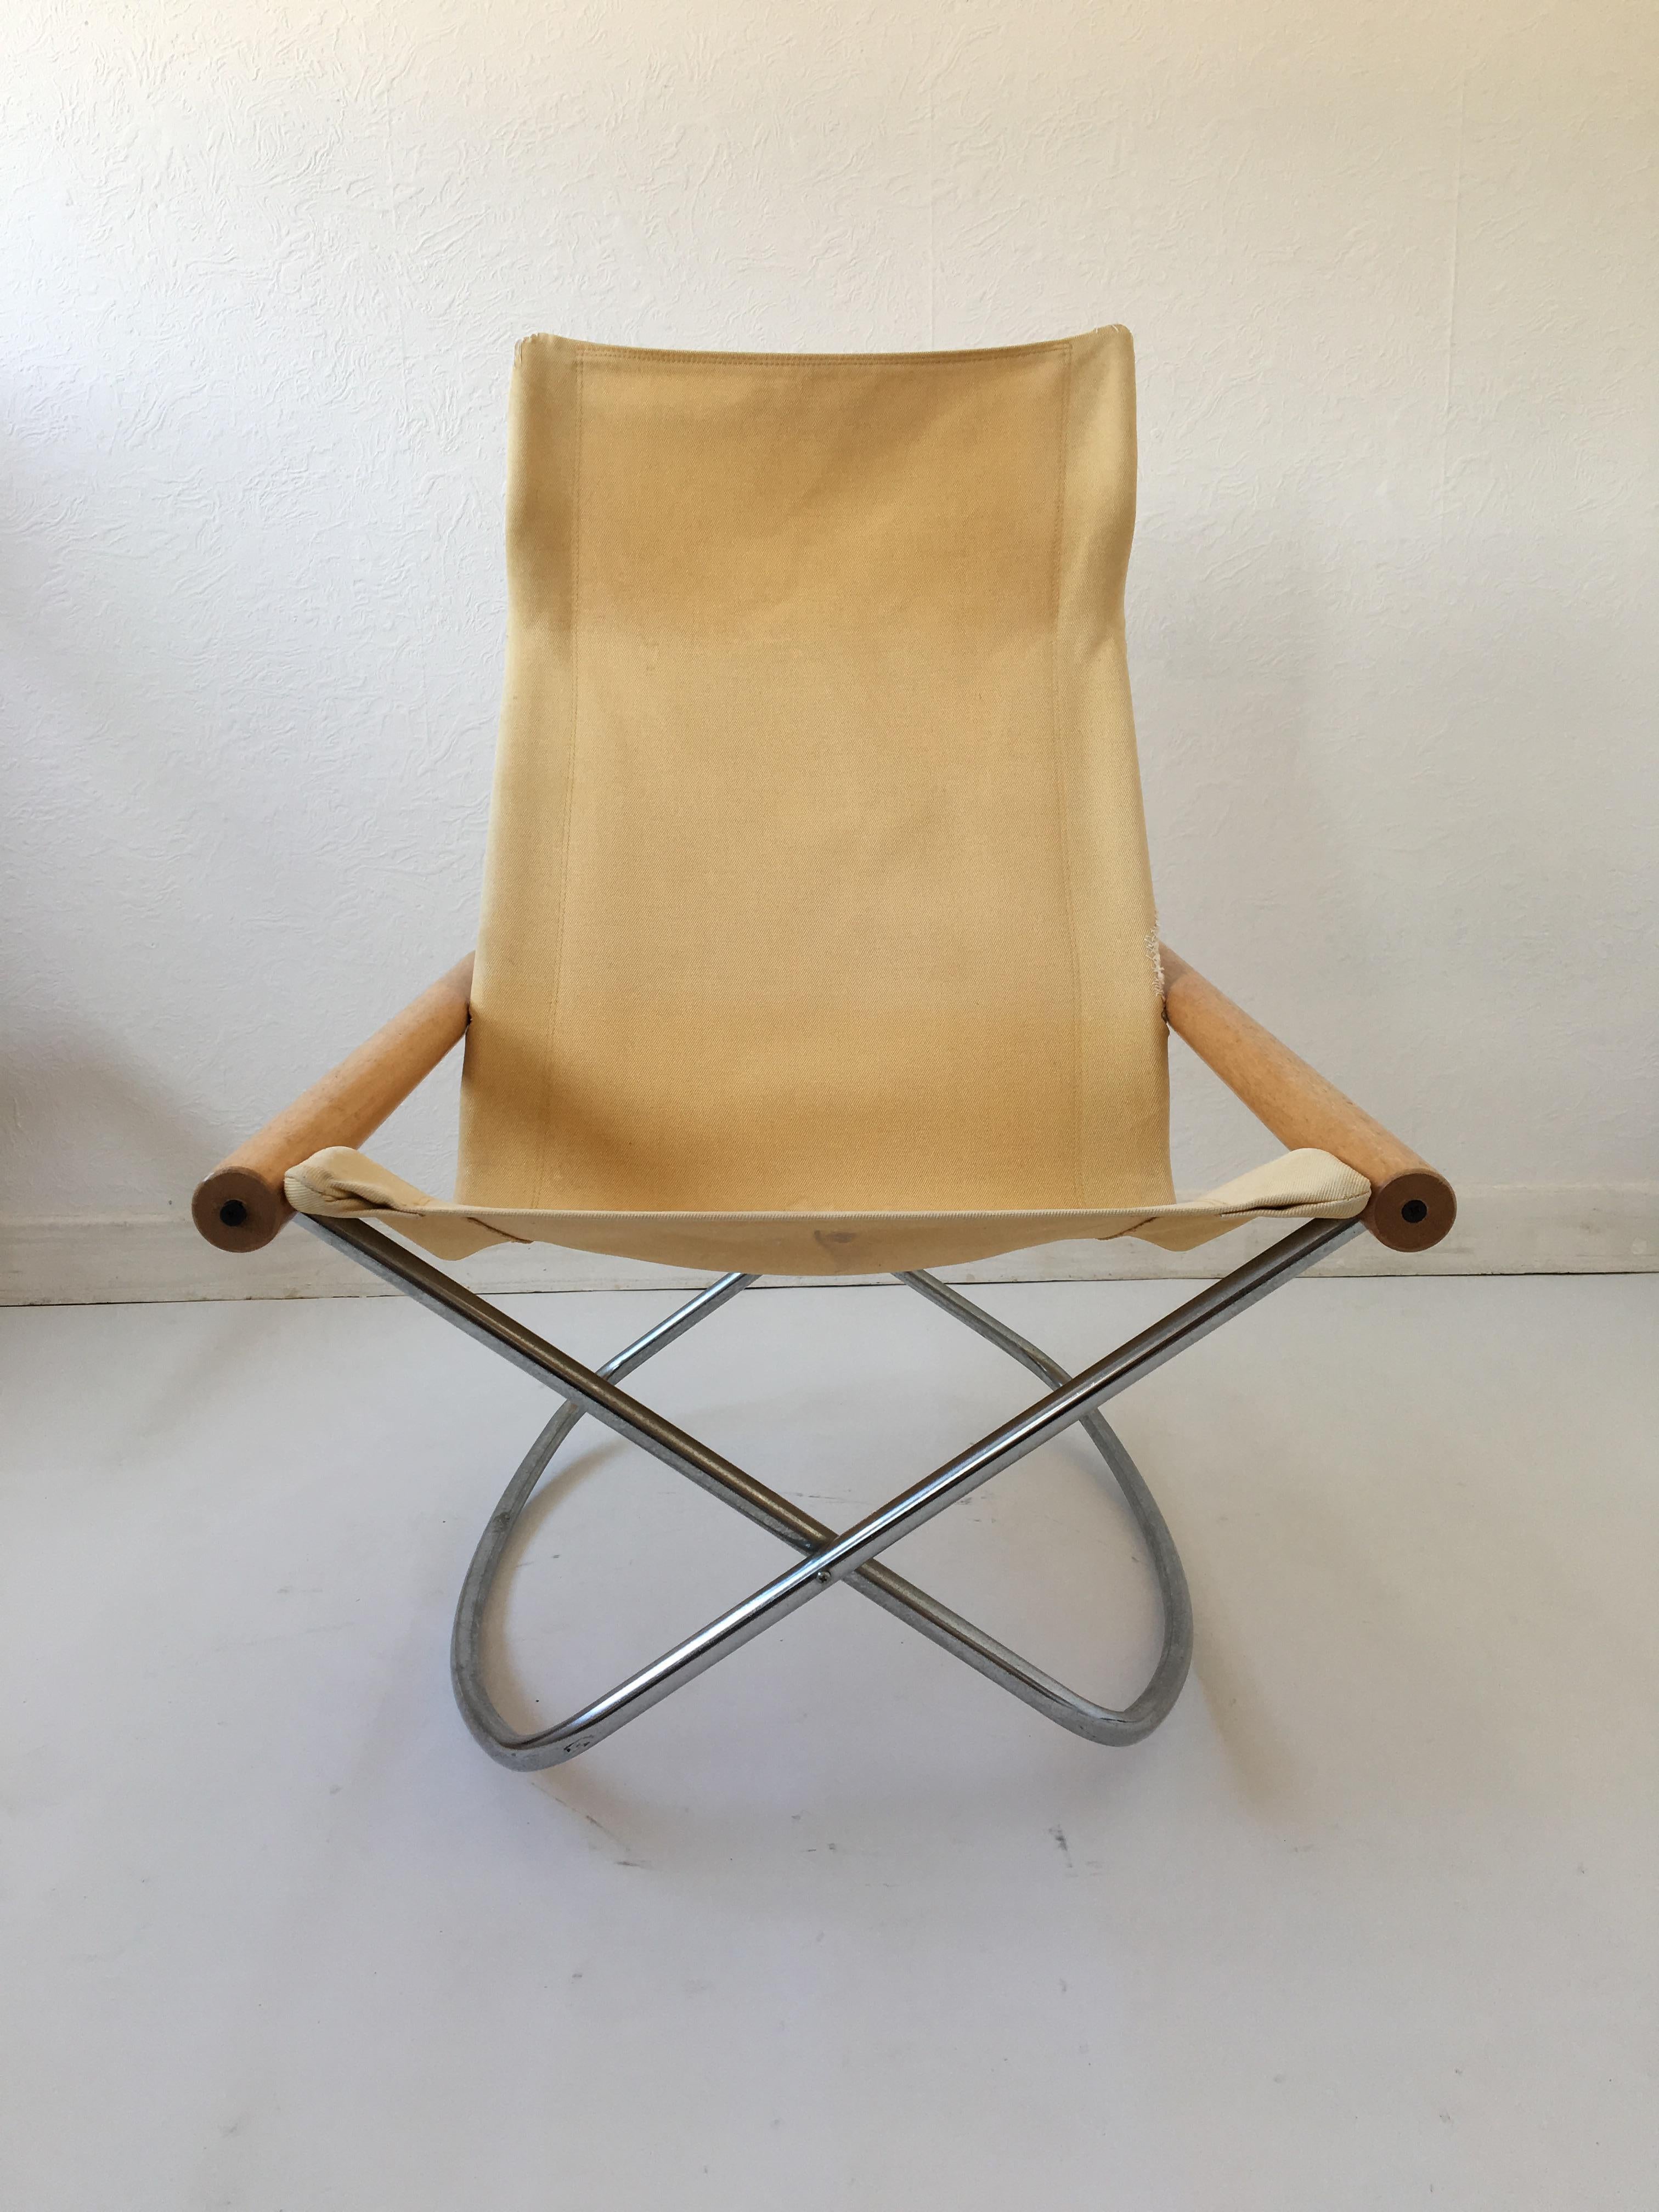 Midcentury Yellow Canvas 'NY' Chairs by Takeshi Nii, for Jox Interni, 1958 For Sale 1